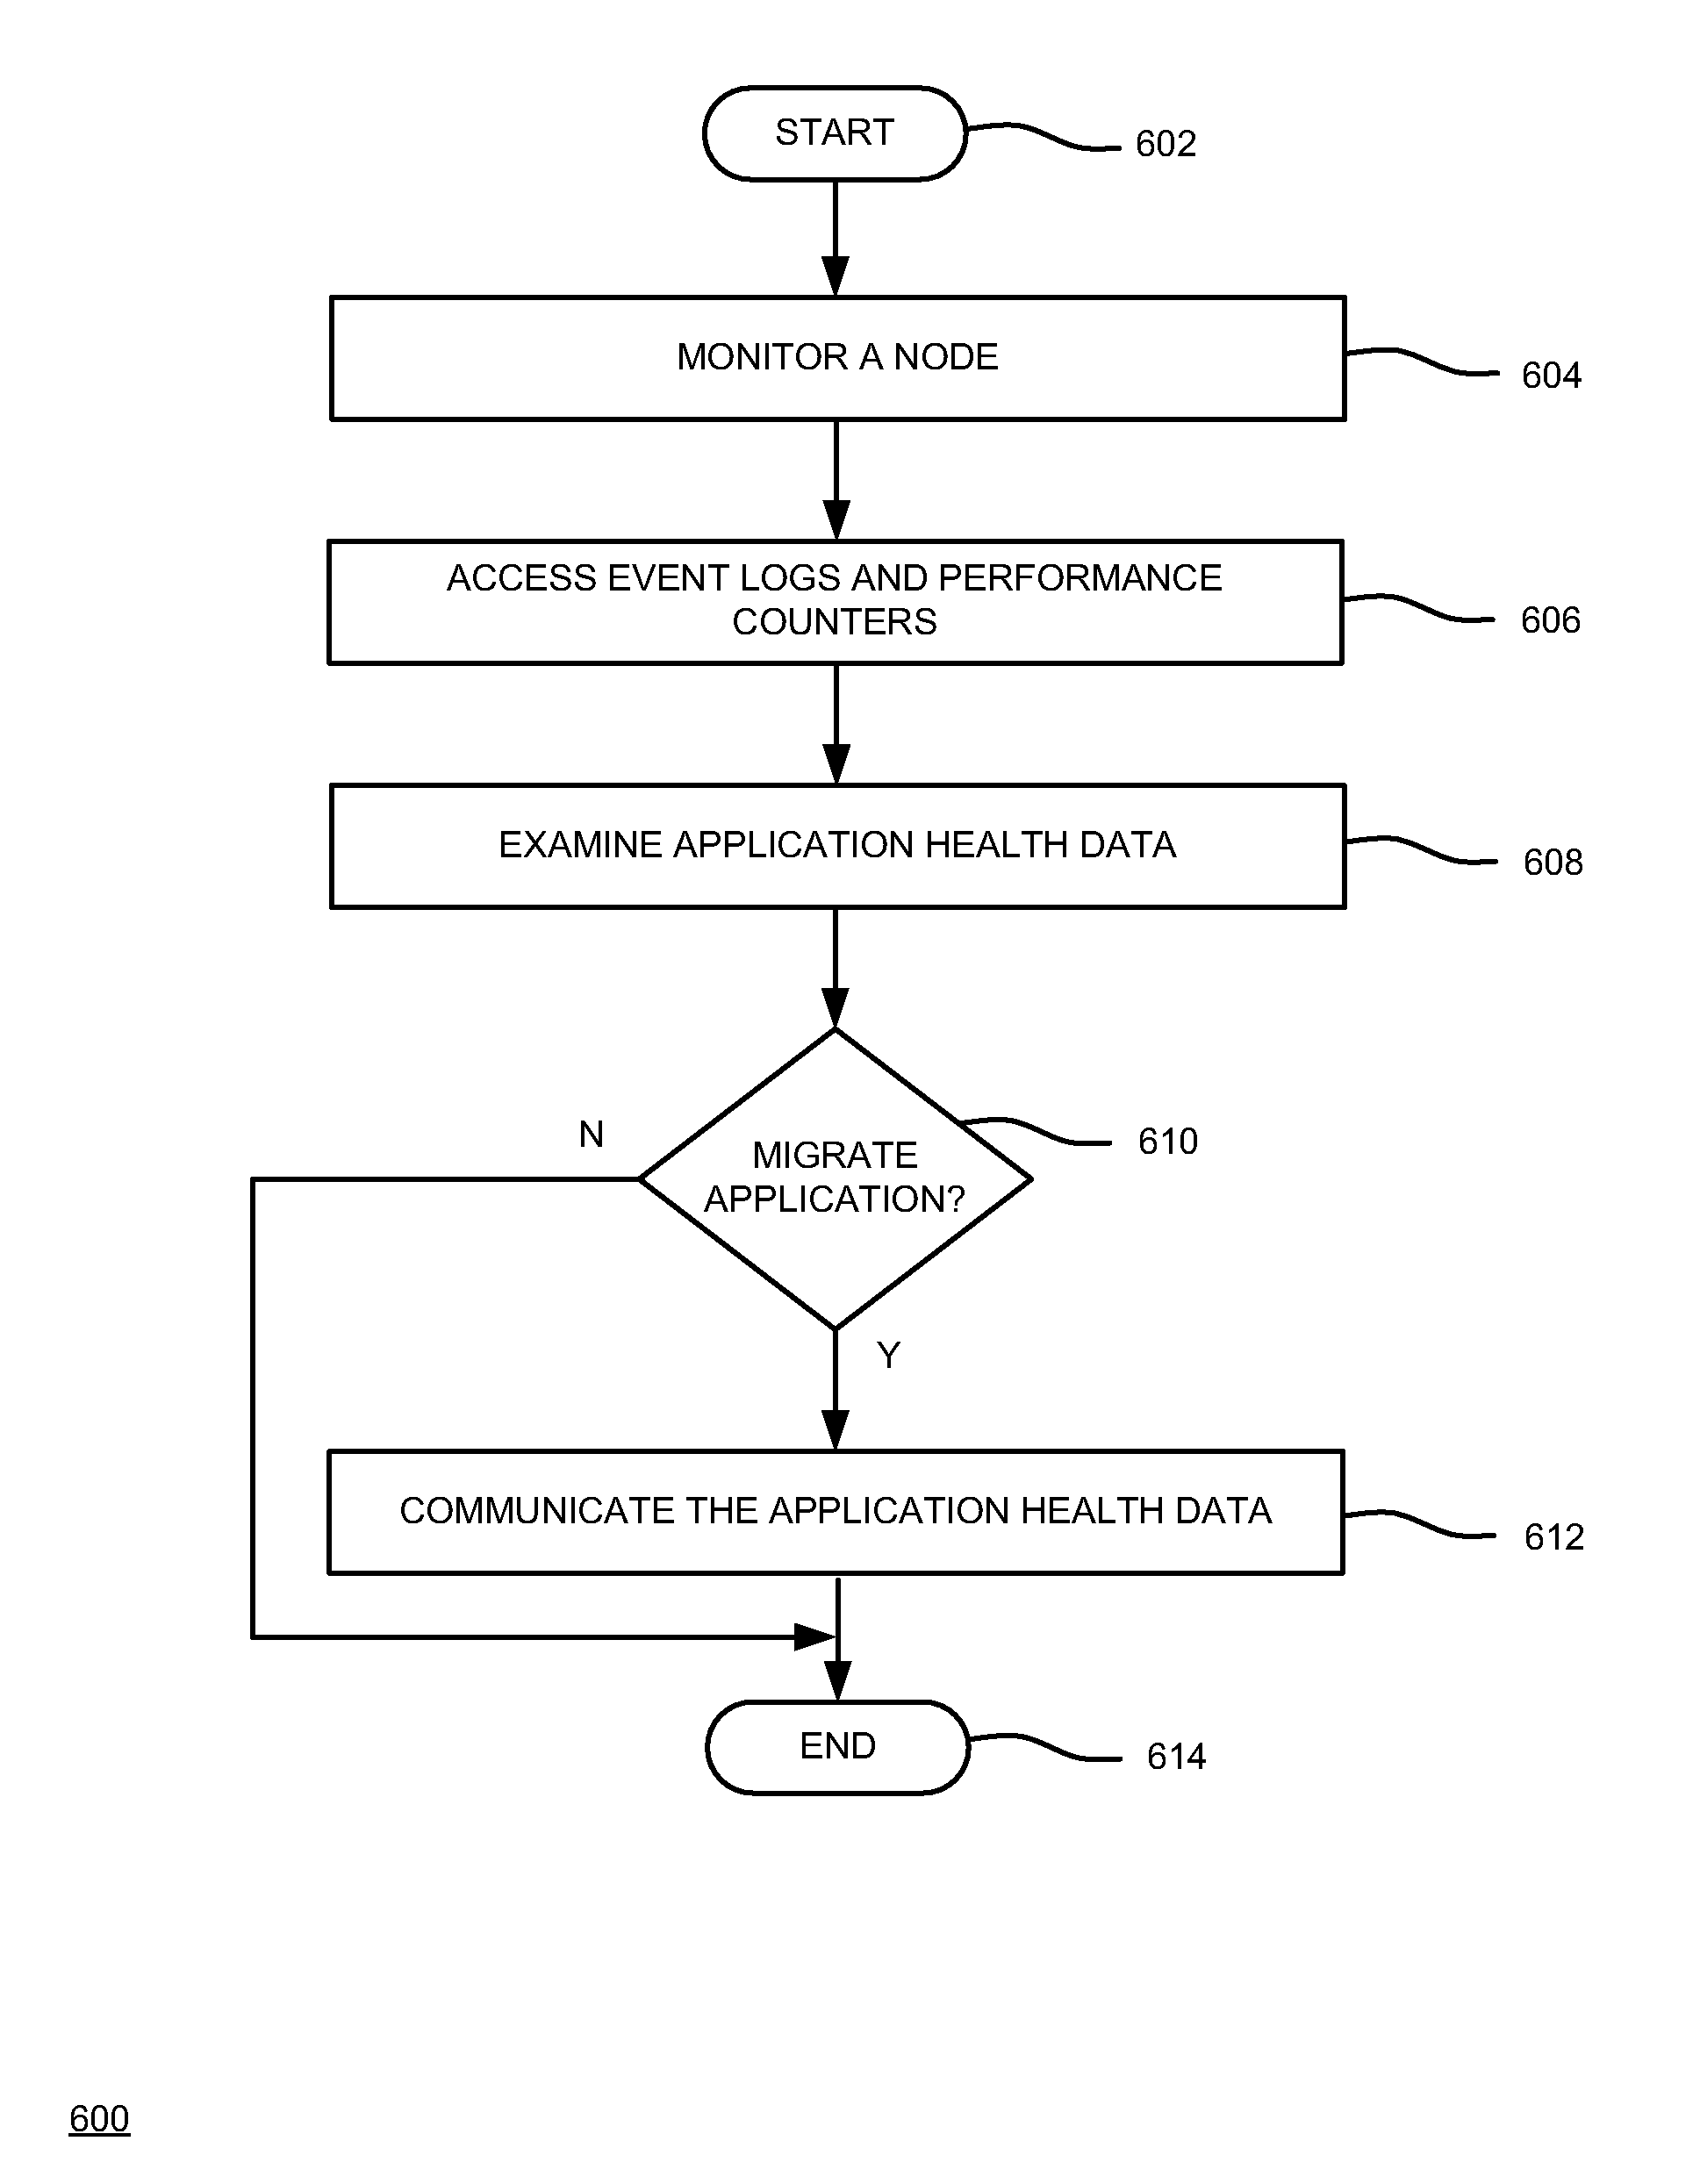 Method and apparatus for proactively monitoring application health data to achieve workload management and high availability